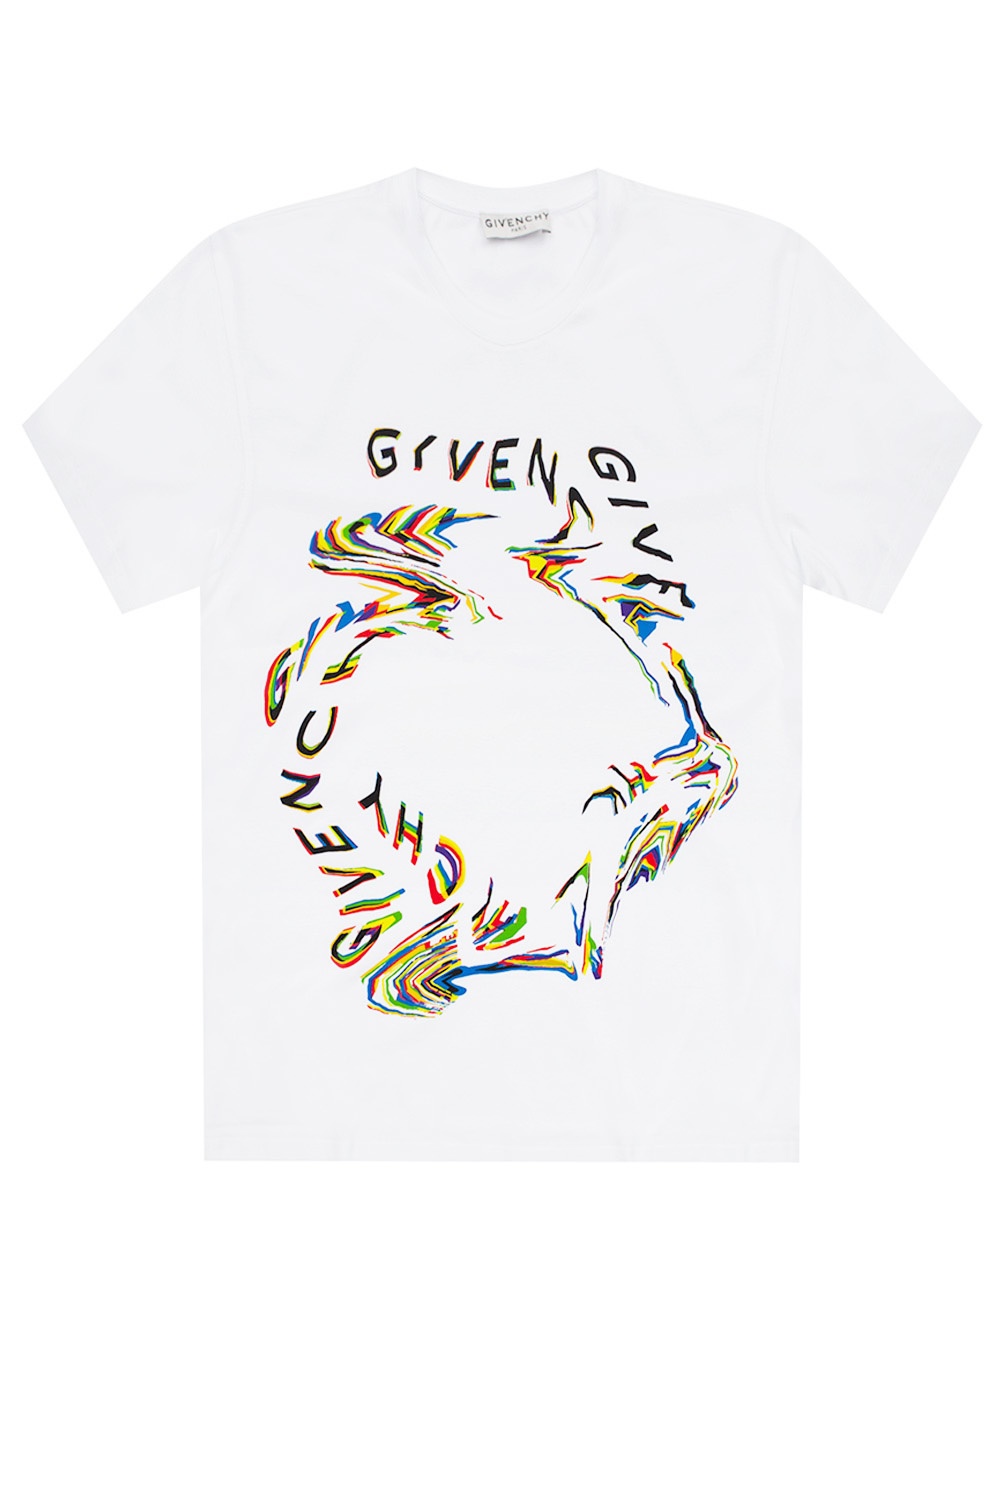 Could Virgil Abloh be a contender to succeed Riccardo Tisci at Givenchy |  shirt | Givenchy Logo T - IetpShops - Men's Clothing